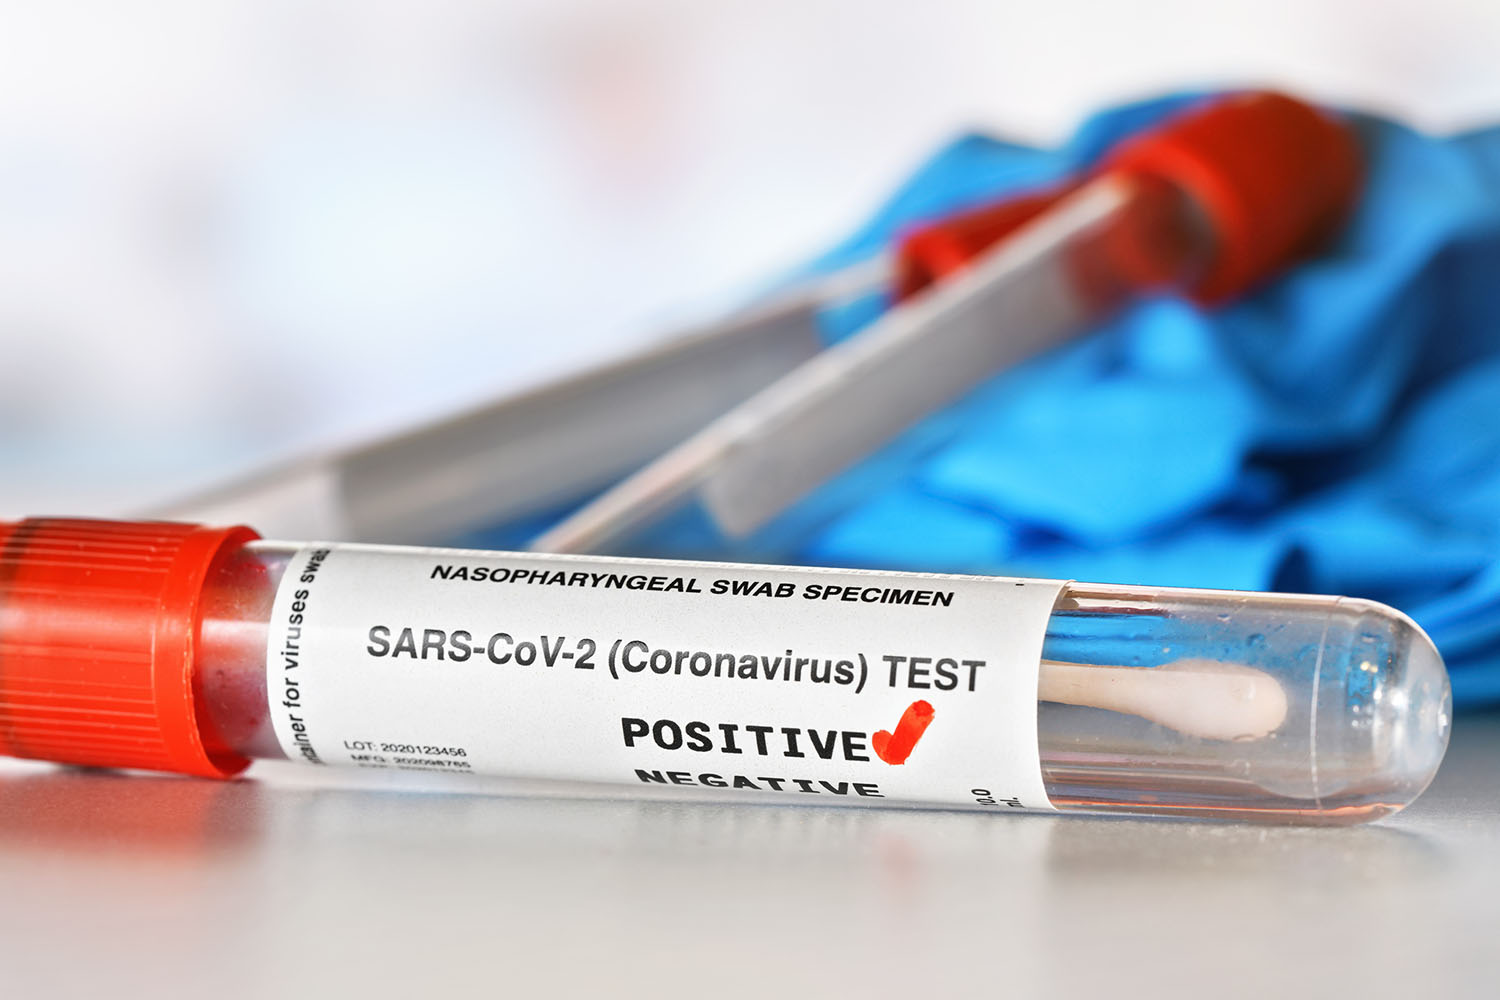 New COVID19 test gives accurate results in minutes UKRI